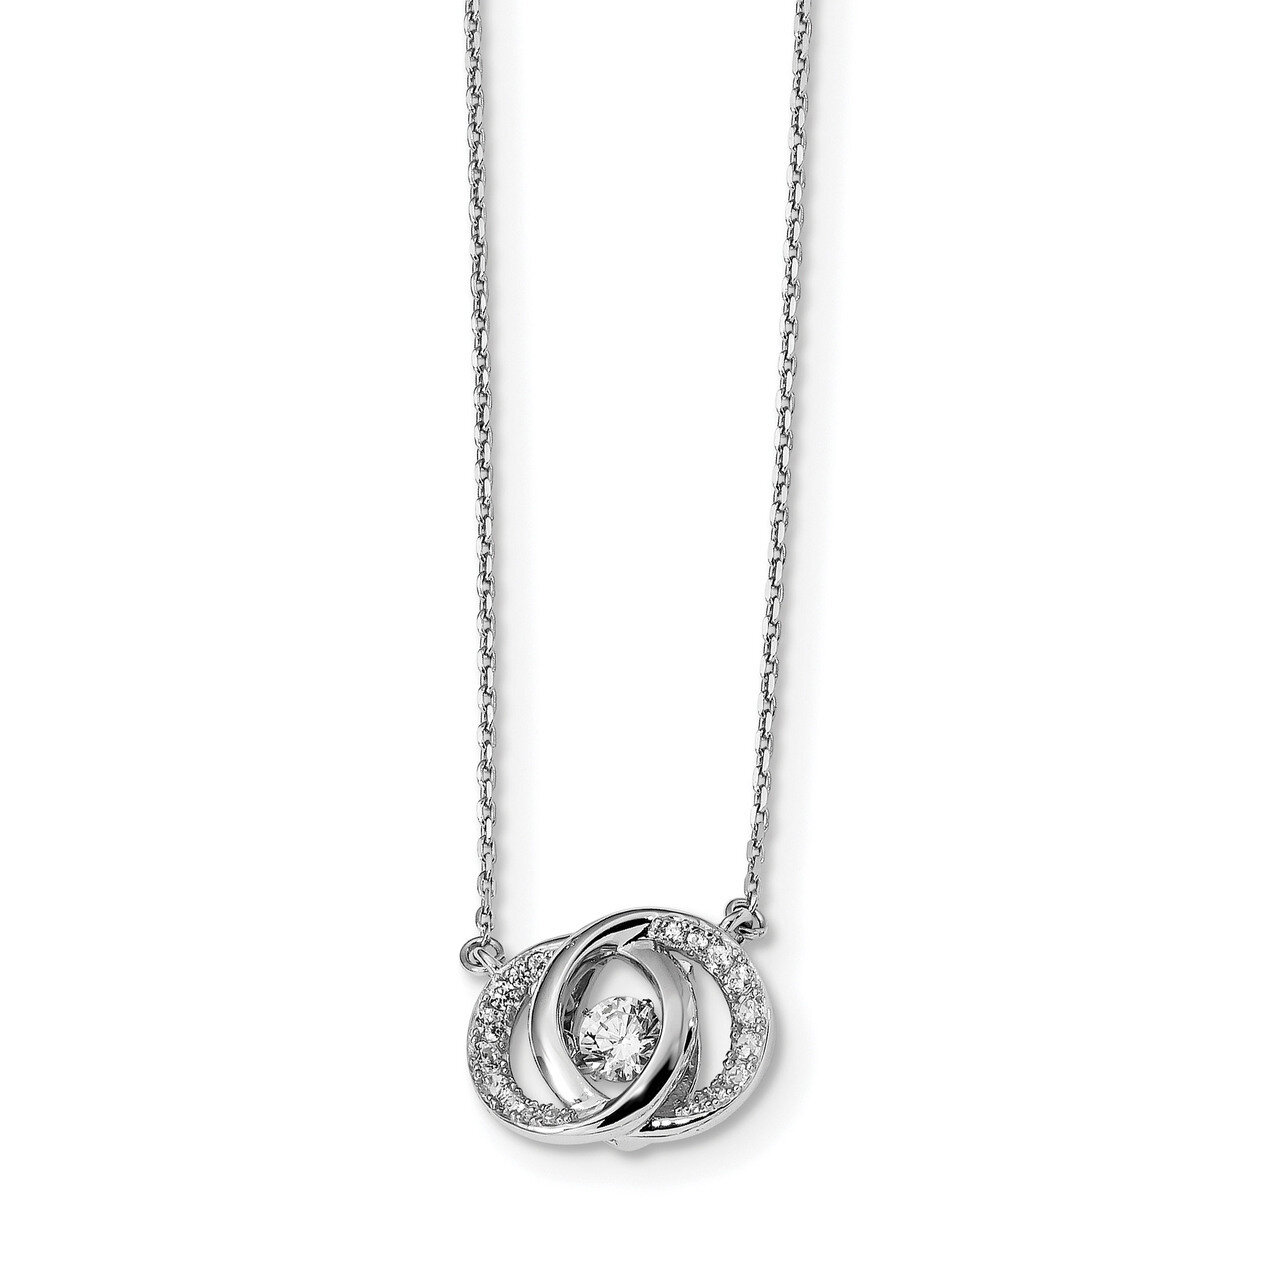 Swarovski &amp; Vibrant CZ Diamond with Two 1 inch Extender Necklace 17.5 Inch Sterling Silver Platinum-plated QG4649-15.5